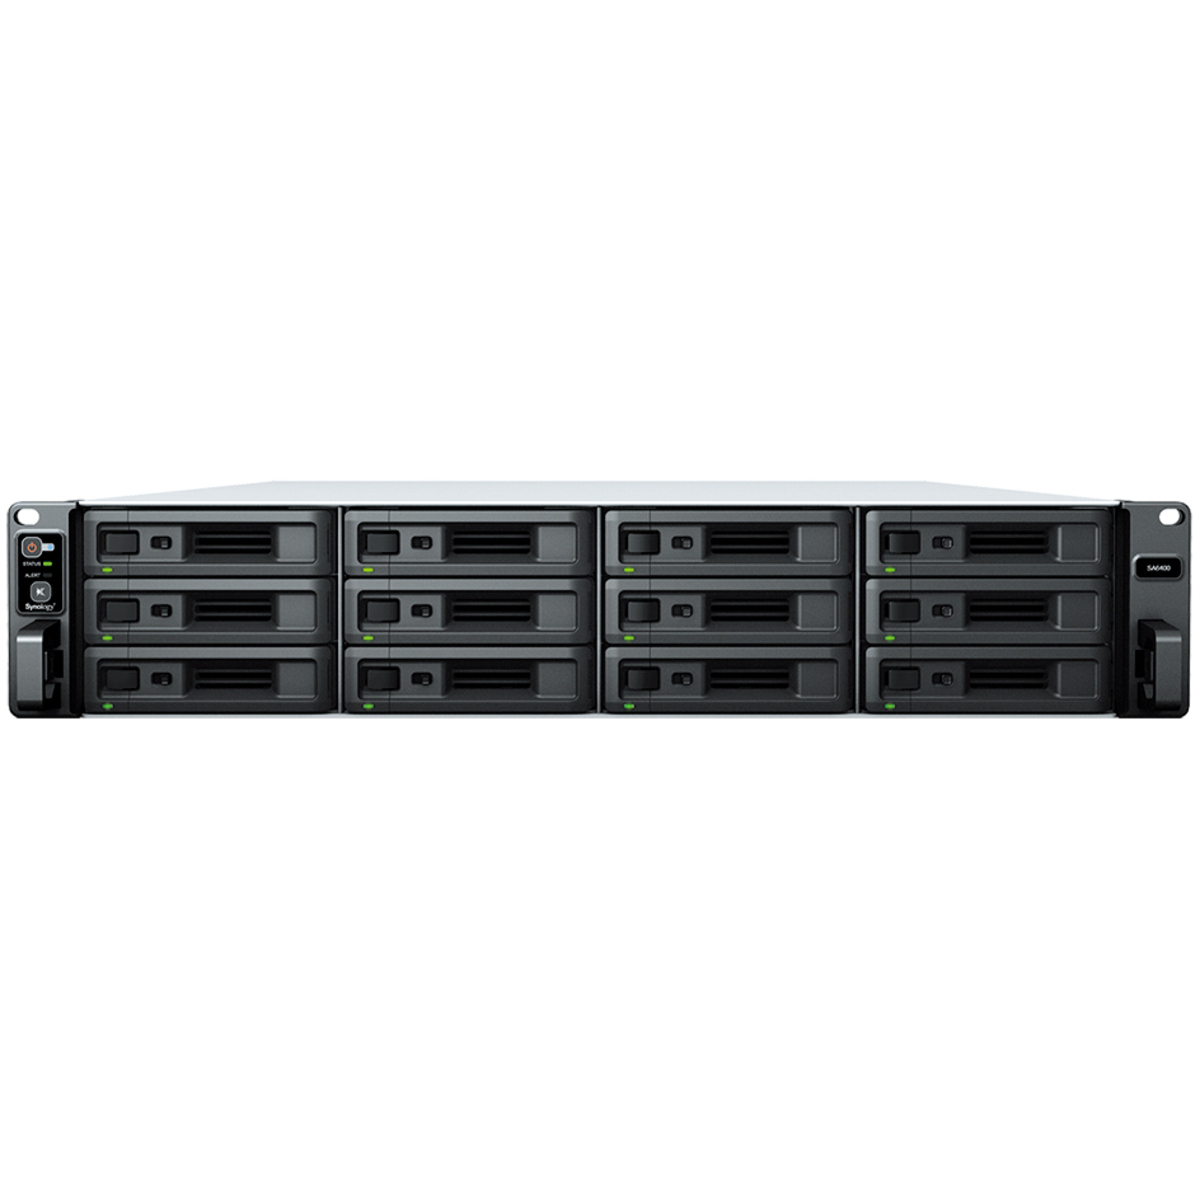 Synology RackStation SA6400 17.2tb 12-Bay RackMount Large Business / Enterprise NAS - Network Attached Storage Device 9x1.9tb Synology SAT5210 Series SAT5210-1920G 2.5 530/500MB/s SATA 6Gb/s SSD ENTERPRISE Class Drives Installed - Burn-In Tested RackStation SA6400